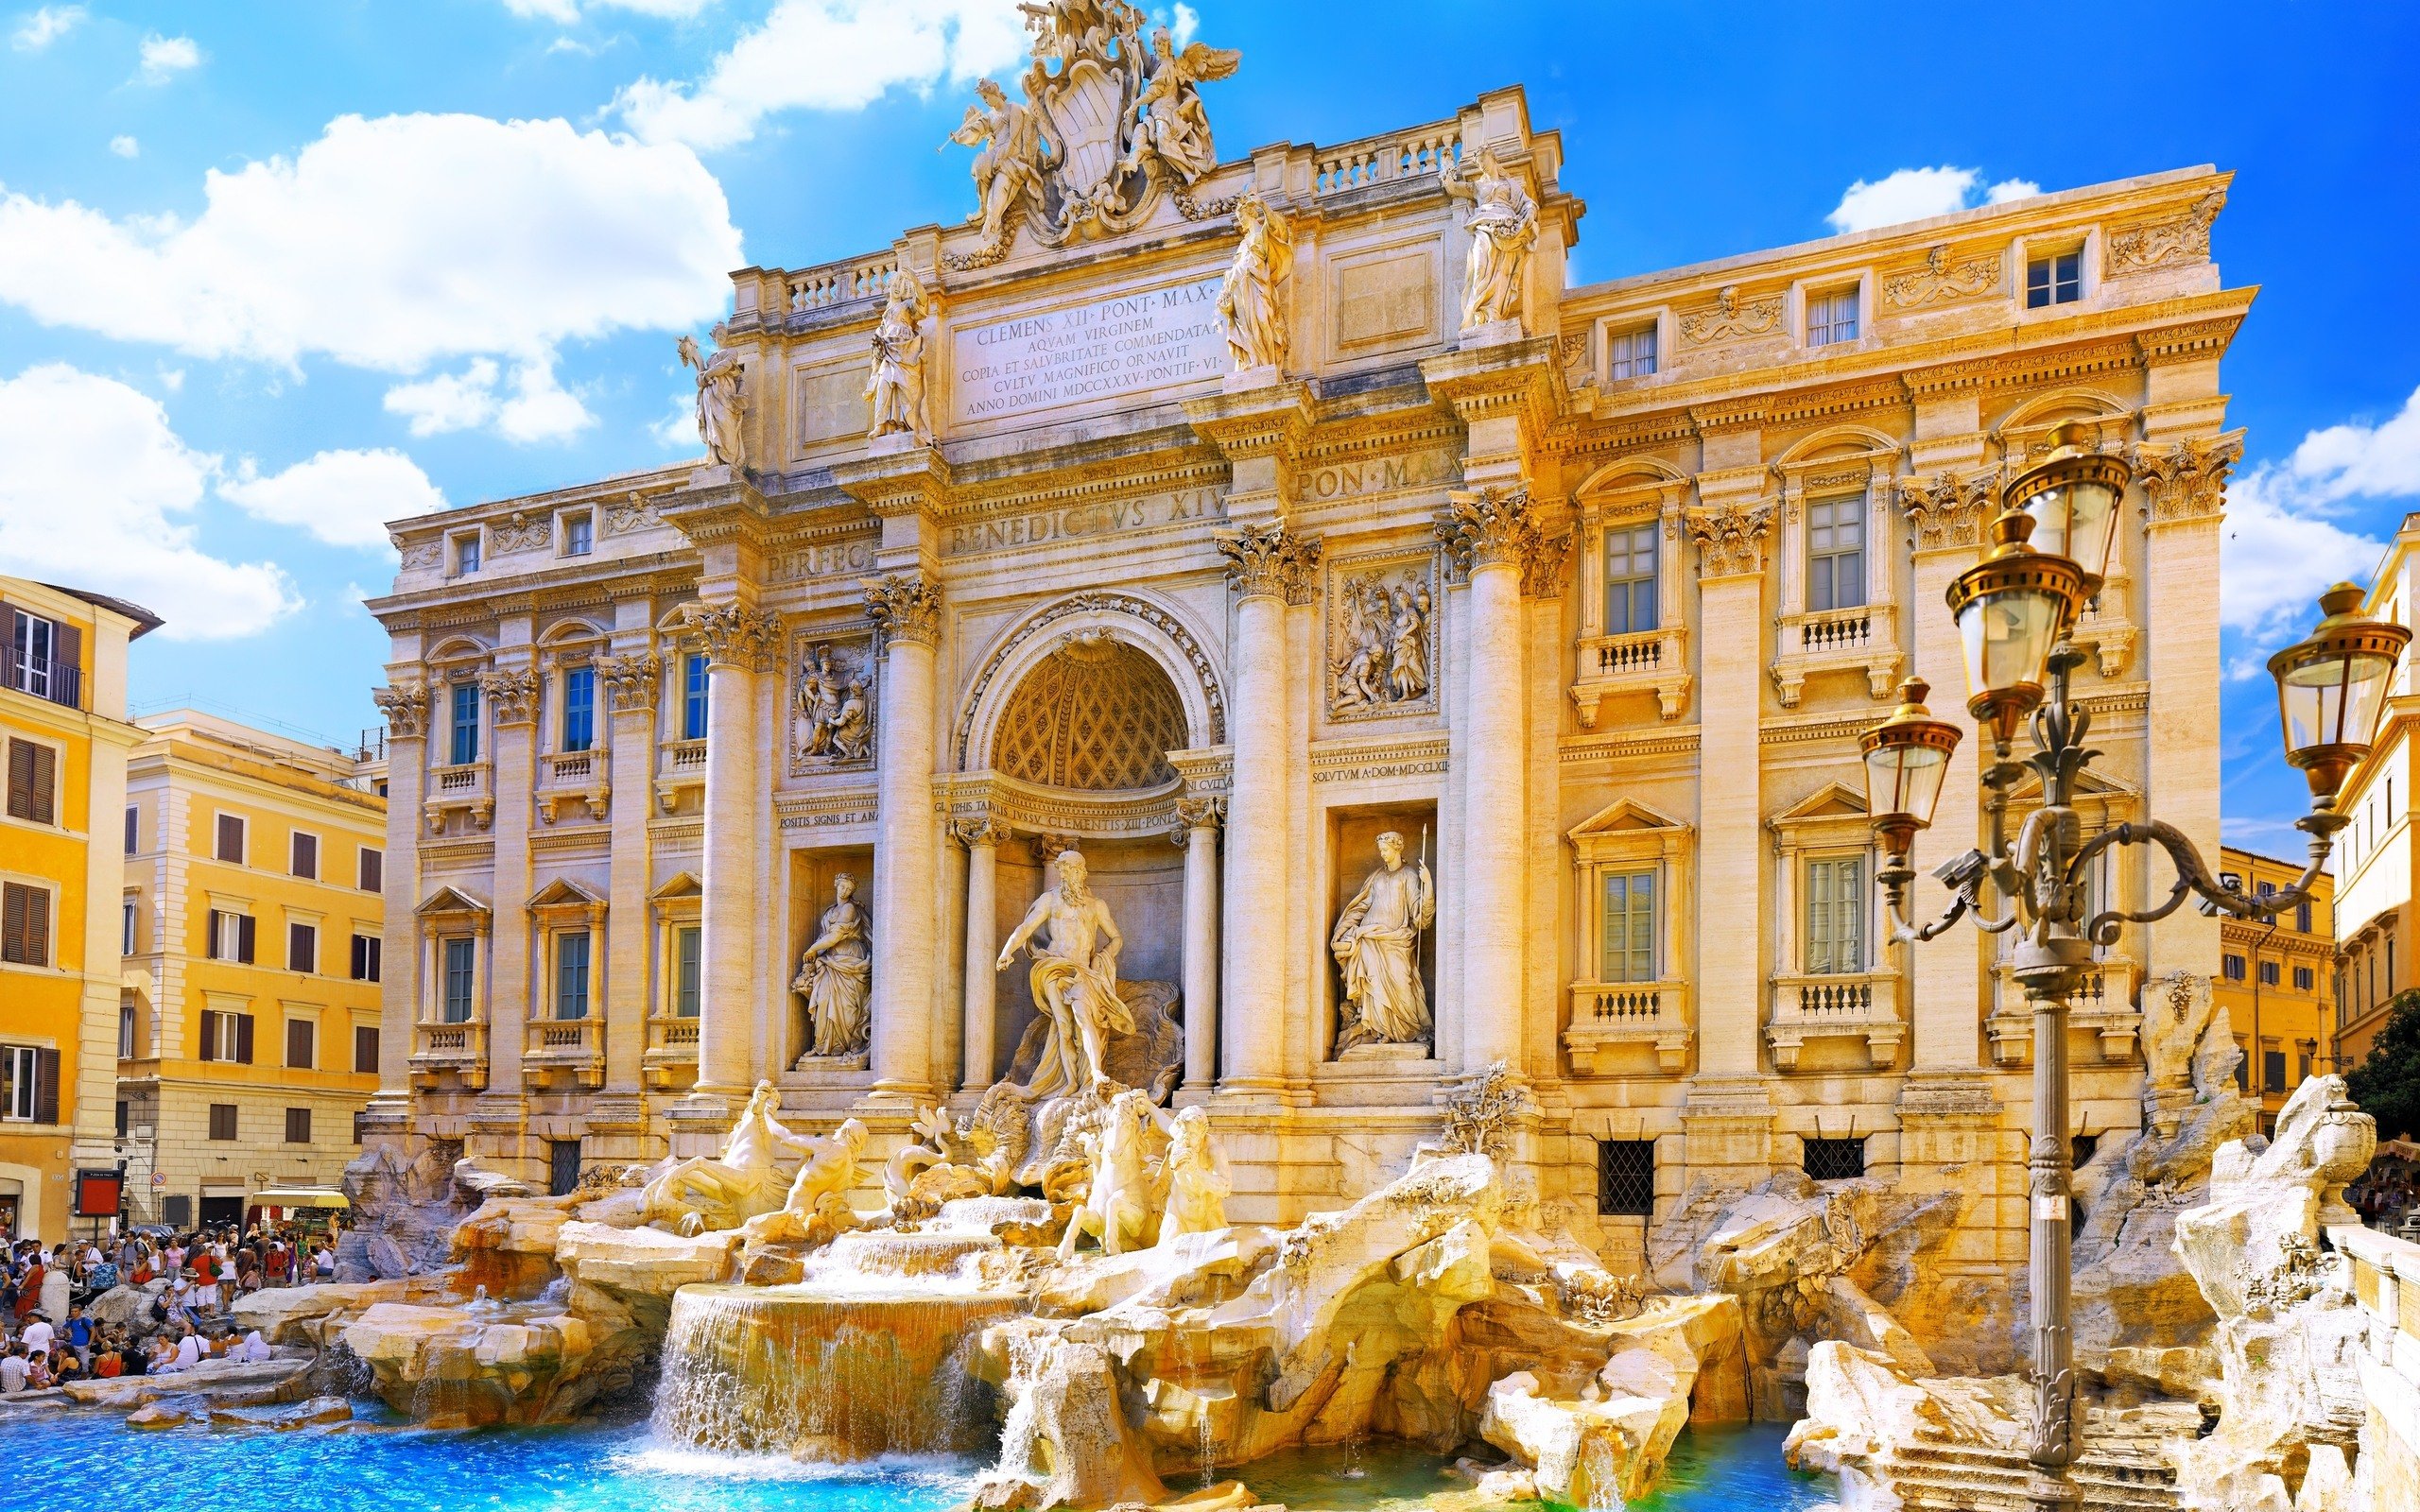 Fontana-Di-Trevi-decorated-with-golden-colored-light